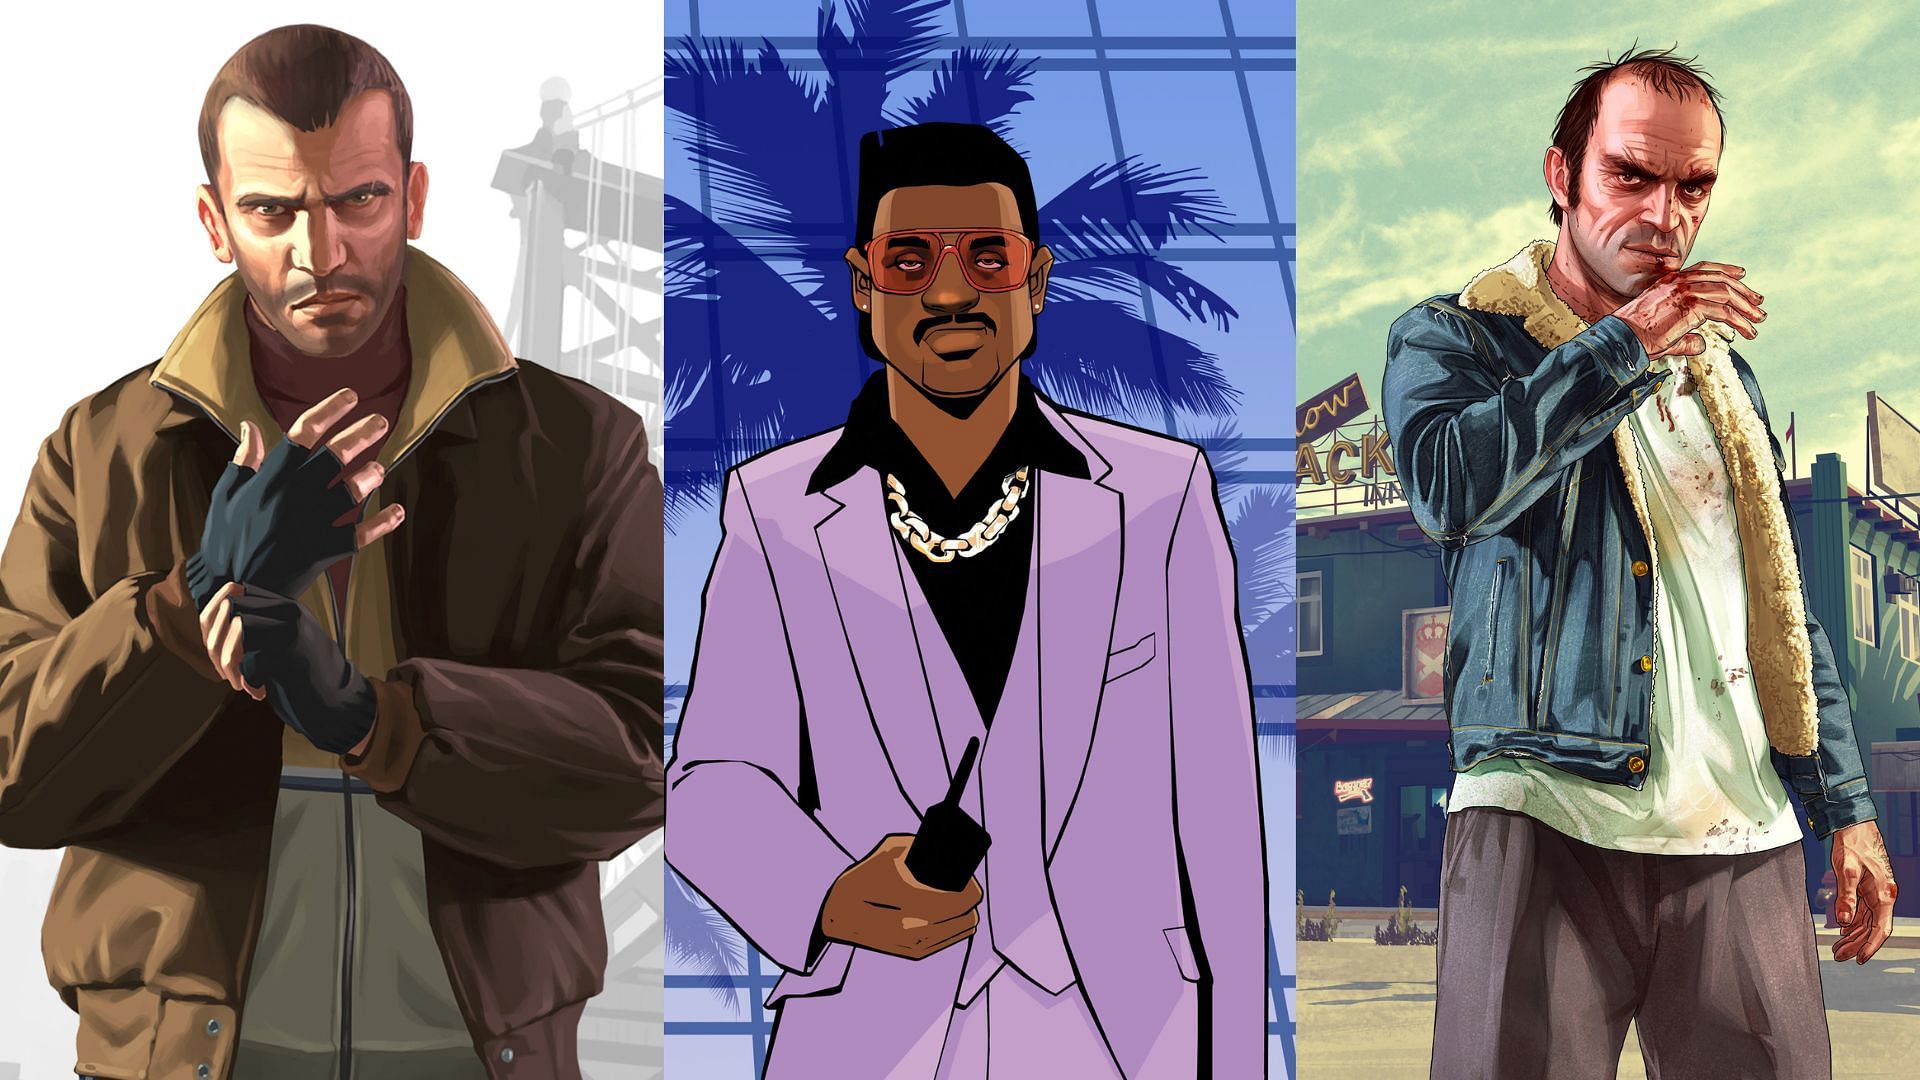 The GTA series is one of the most popular in the gaming industry (Images via Rockstar Games)